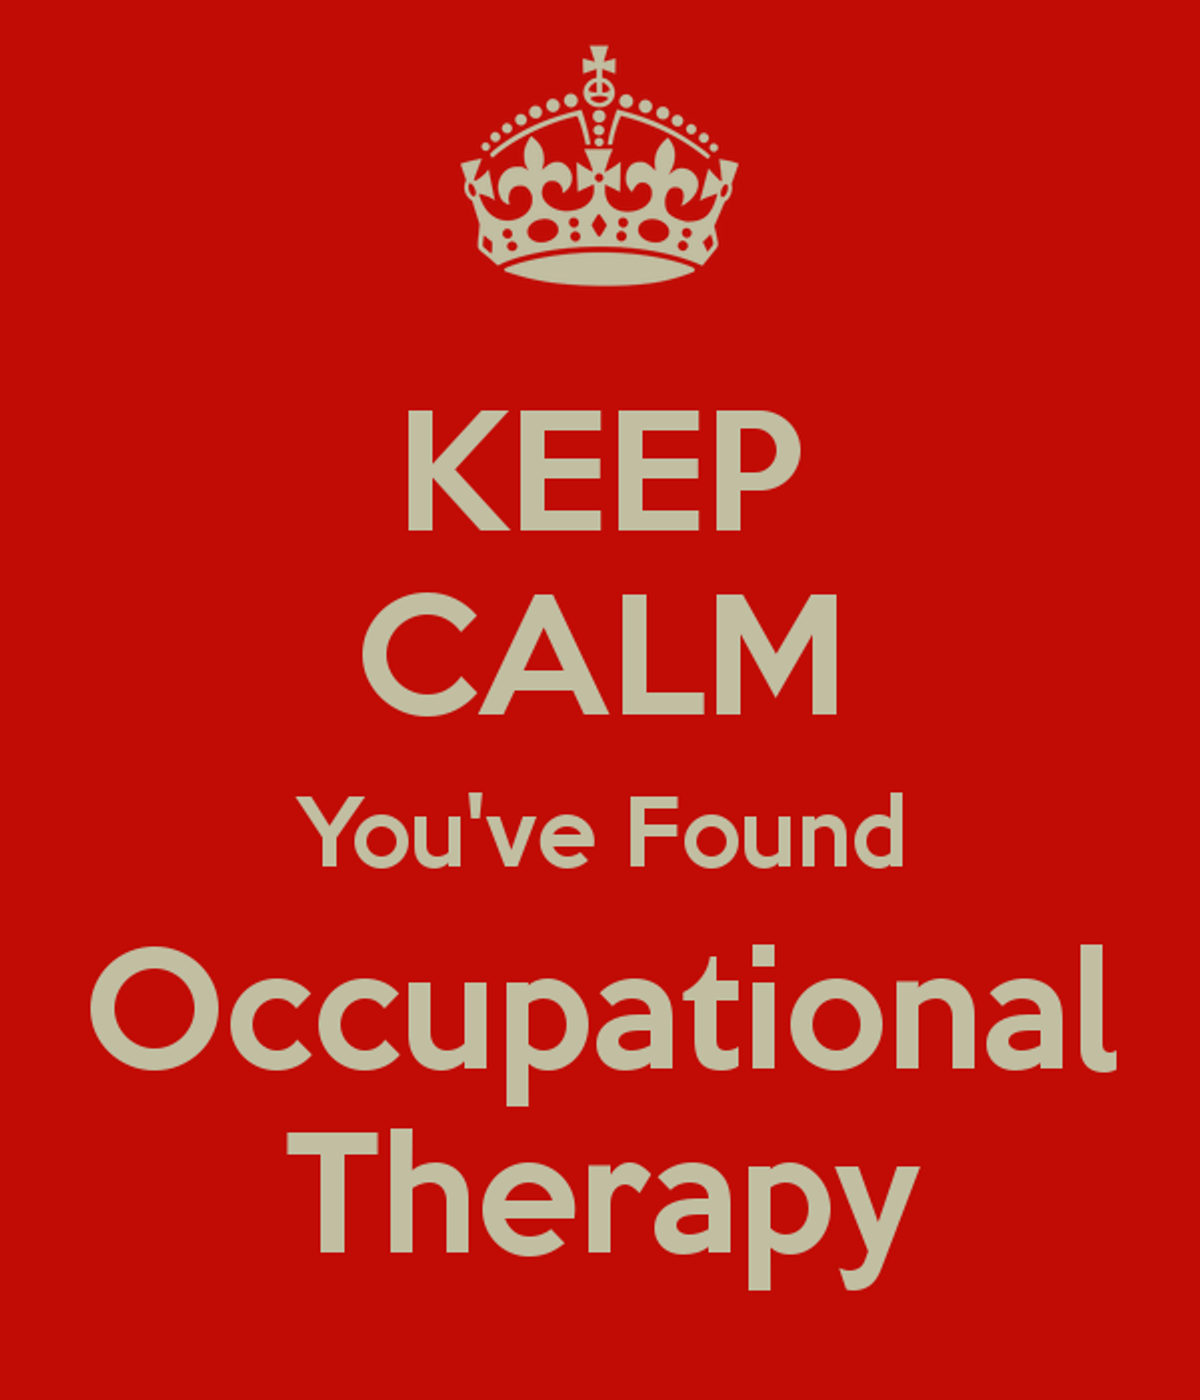 How I found Occupational Therapy